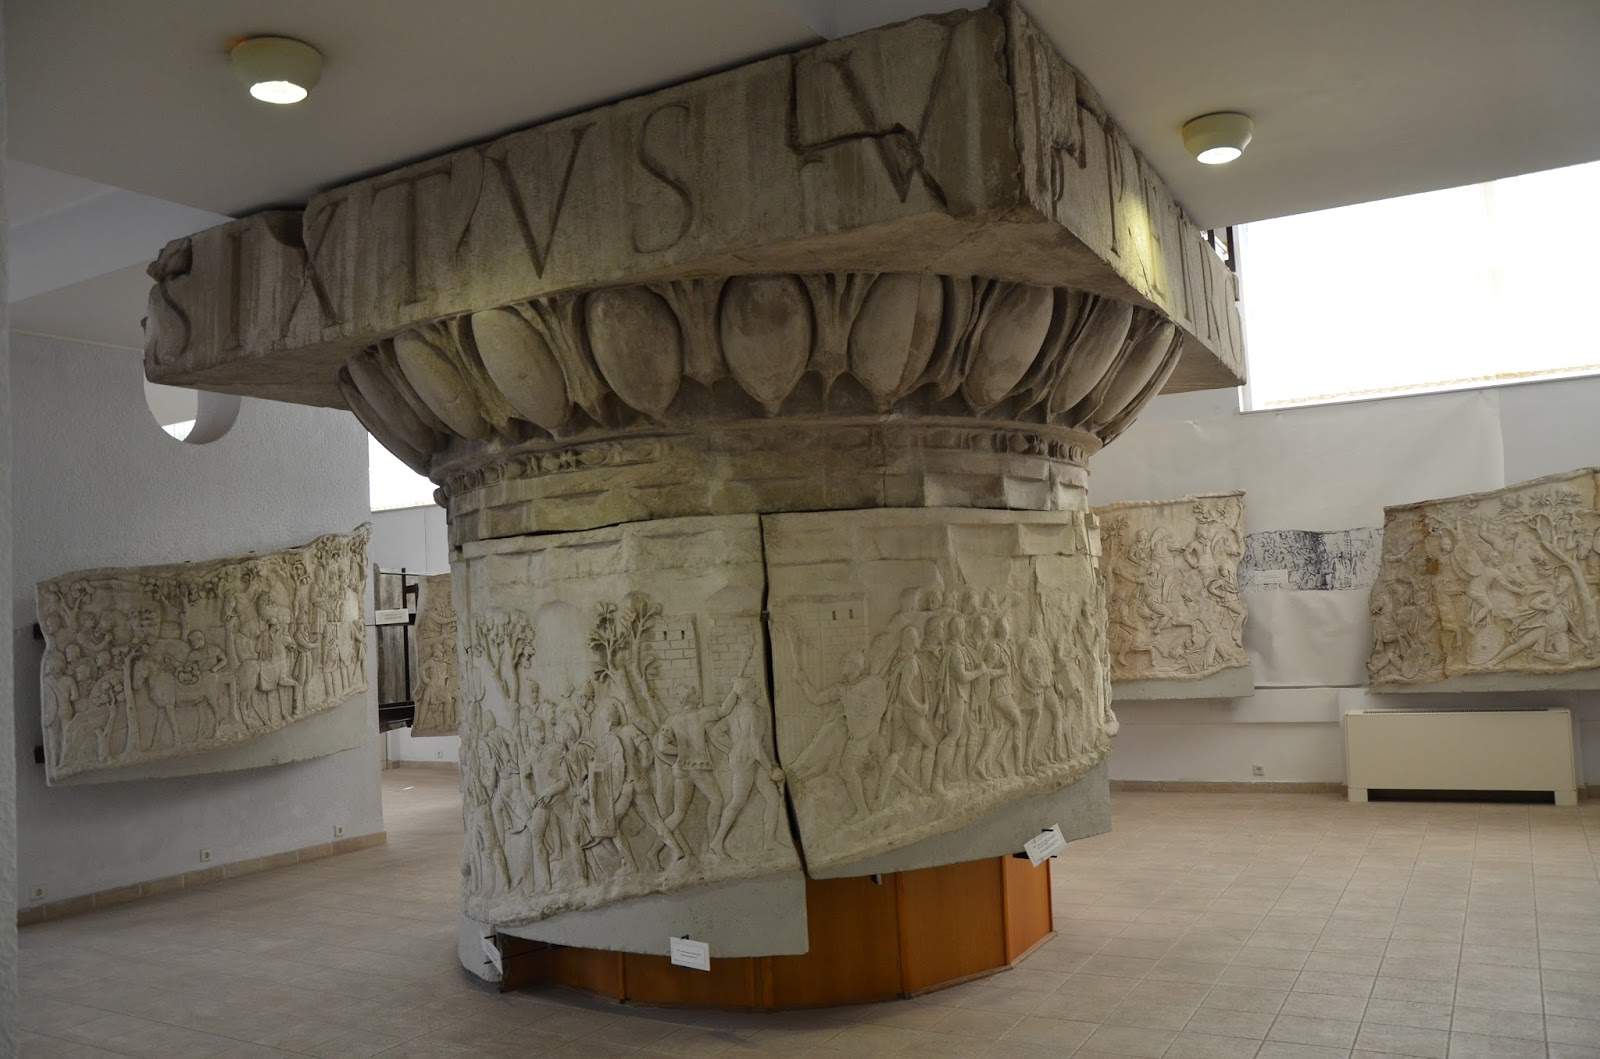 Replica of Trajan's Column at the National History Museum in Bucharest, Romania